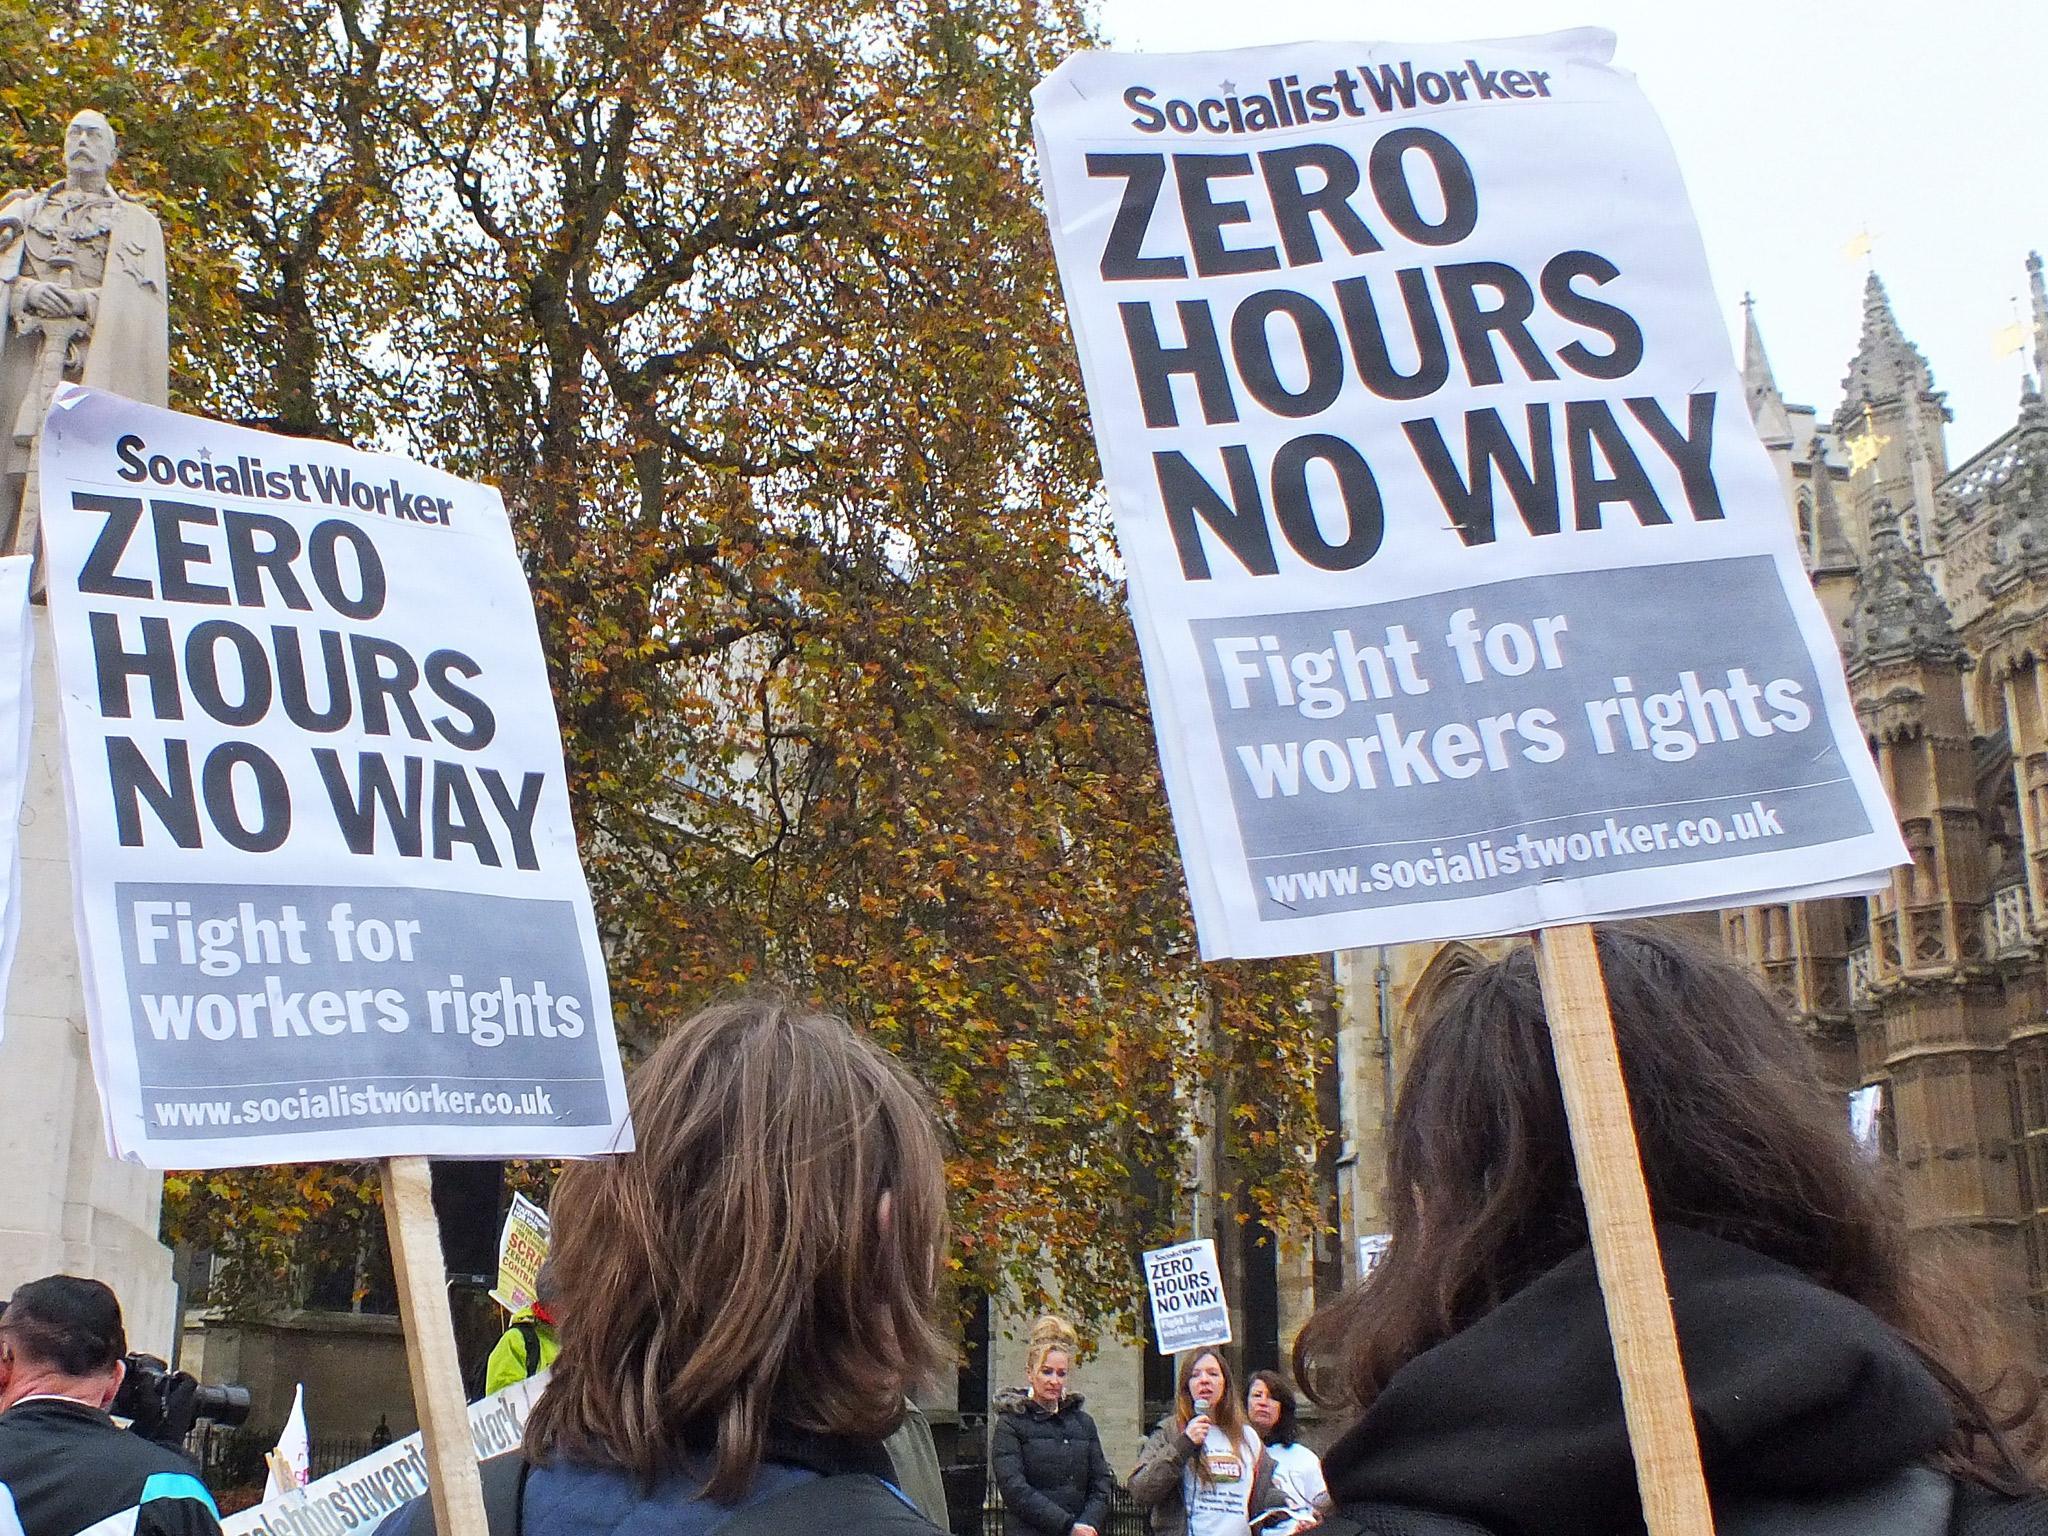 Fast Food Rights campaigners and members of the Bakers, Food and Allied Workers Union protest against the rise of zero hour contracts, in London last weekend